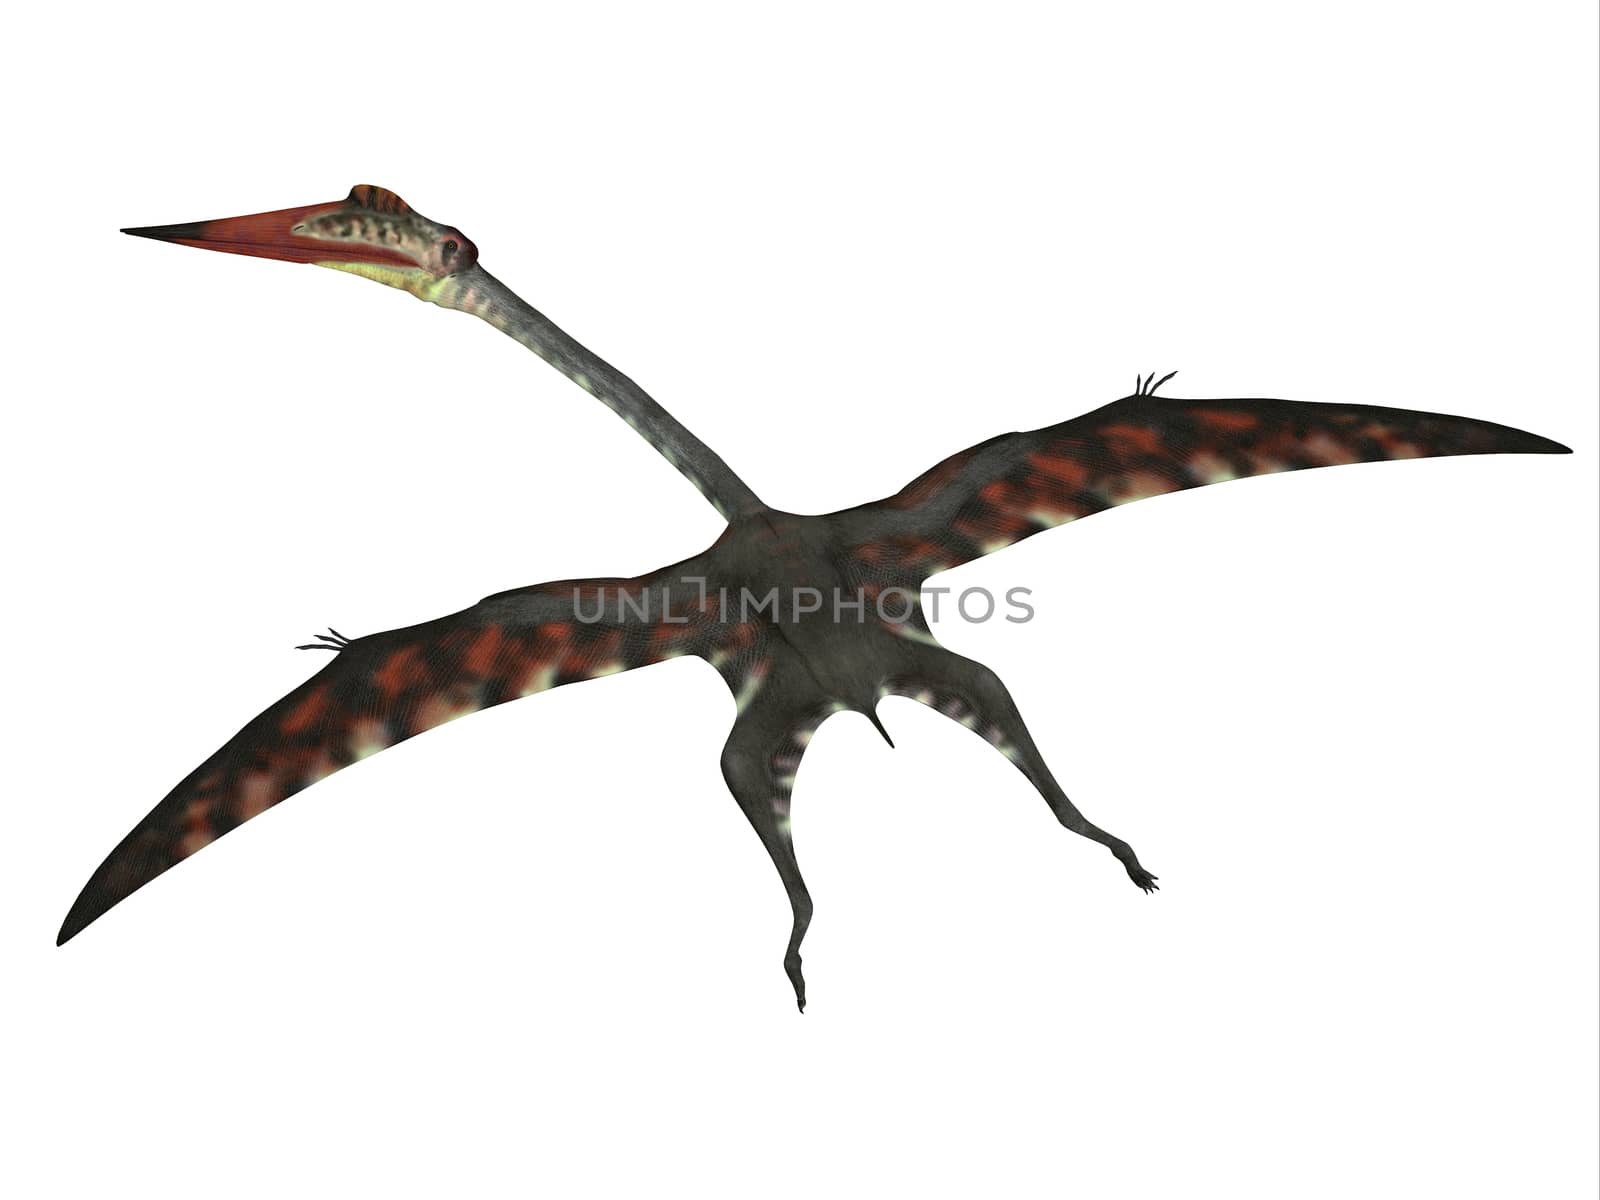 The carnivorous Quetzalcoatlus was a flying pterosaur reptile that lived in North America in the Cretaceous Period.